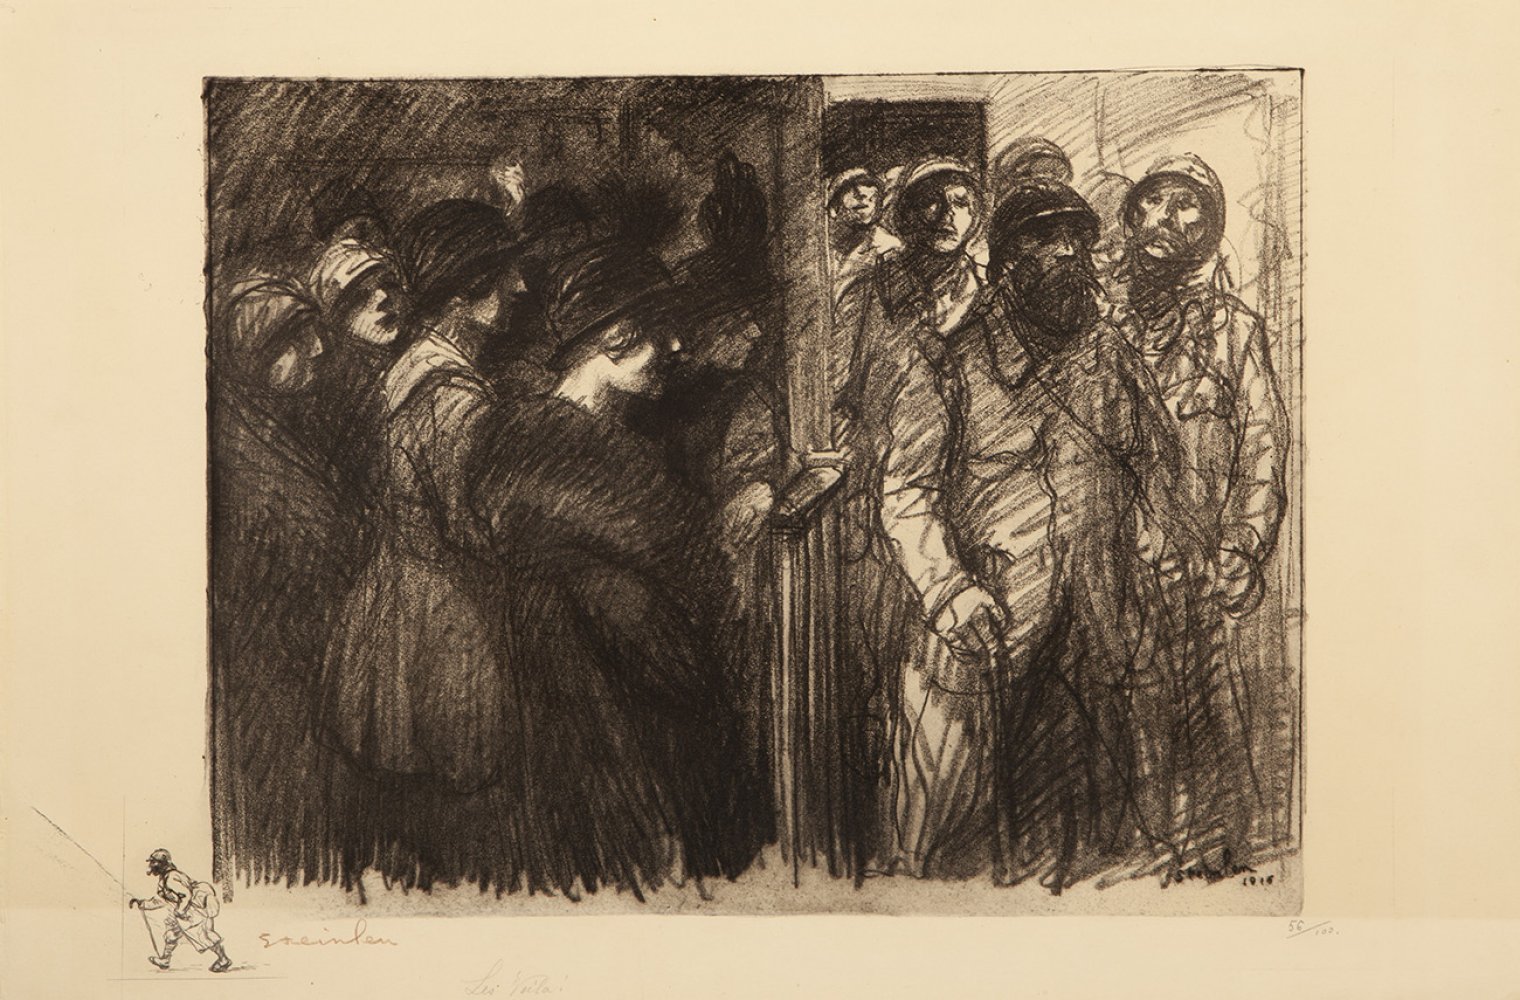 THÉOPHILE ALEXANDRE STEINLEN (Switzerland, 1859-France, 1923).Untitled.Lithograph on paper. Copy